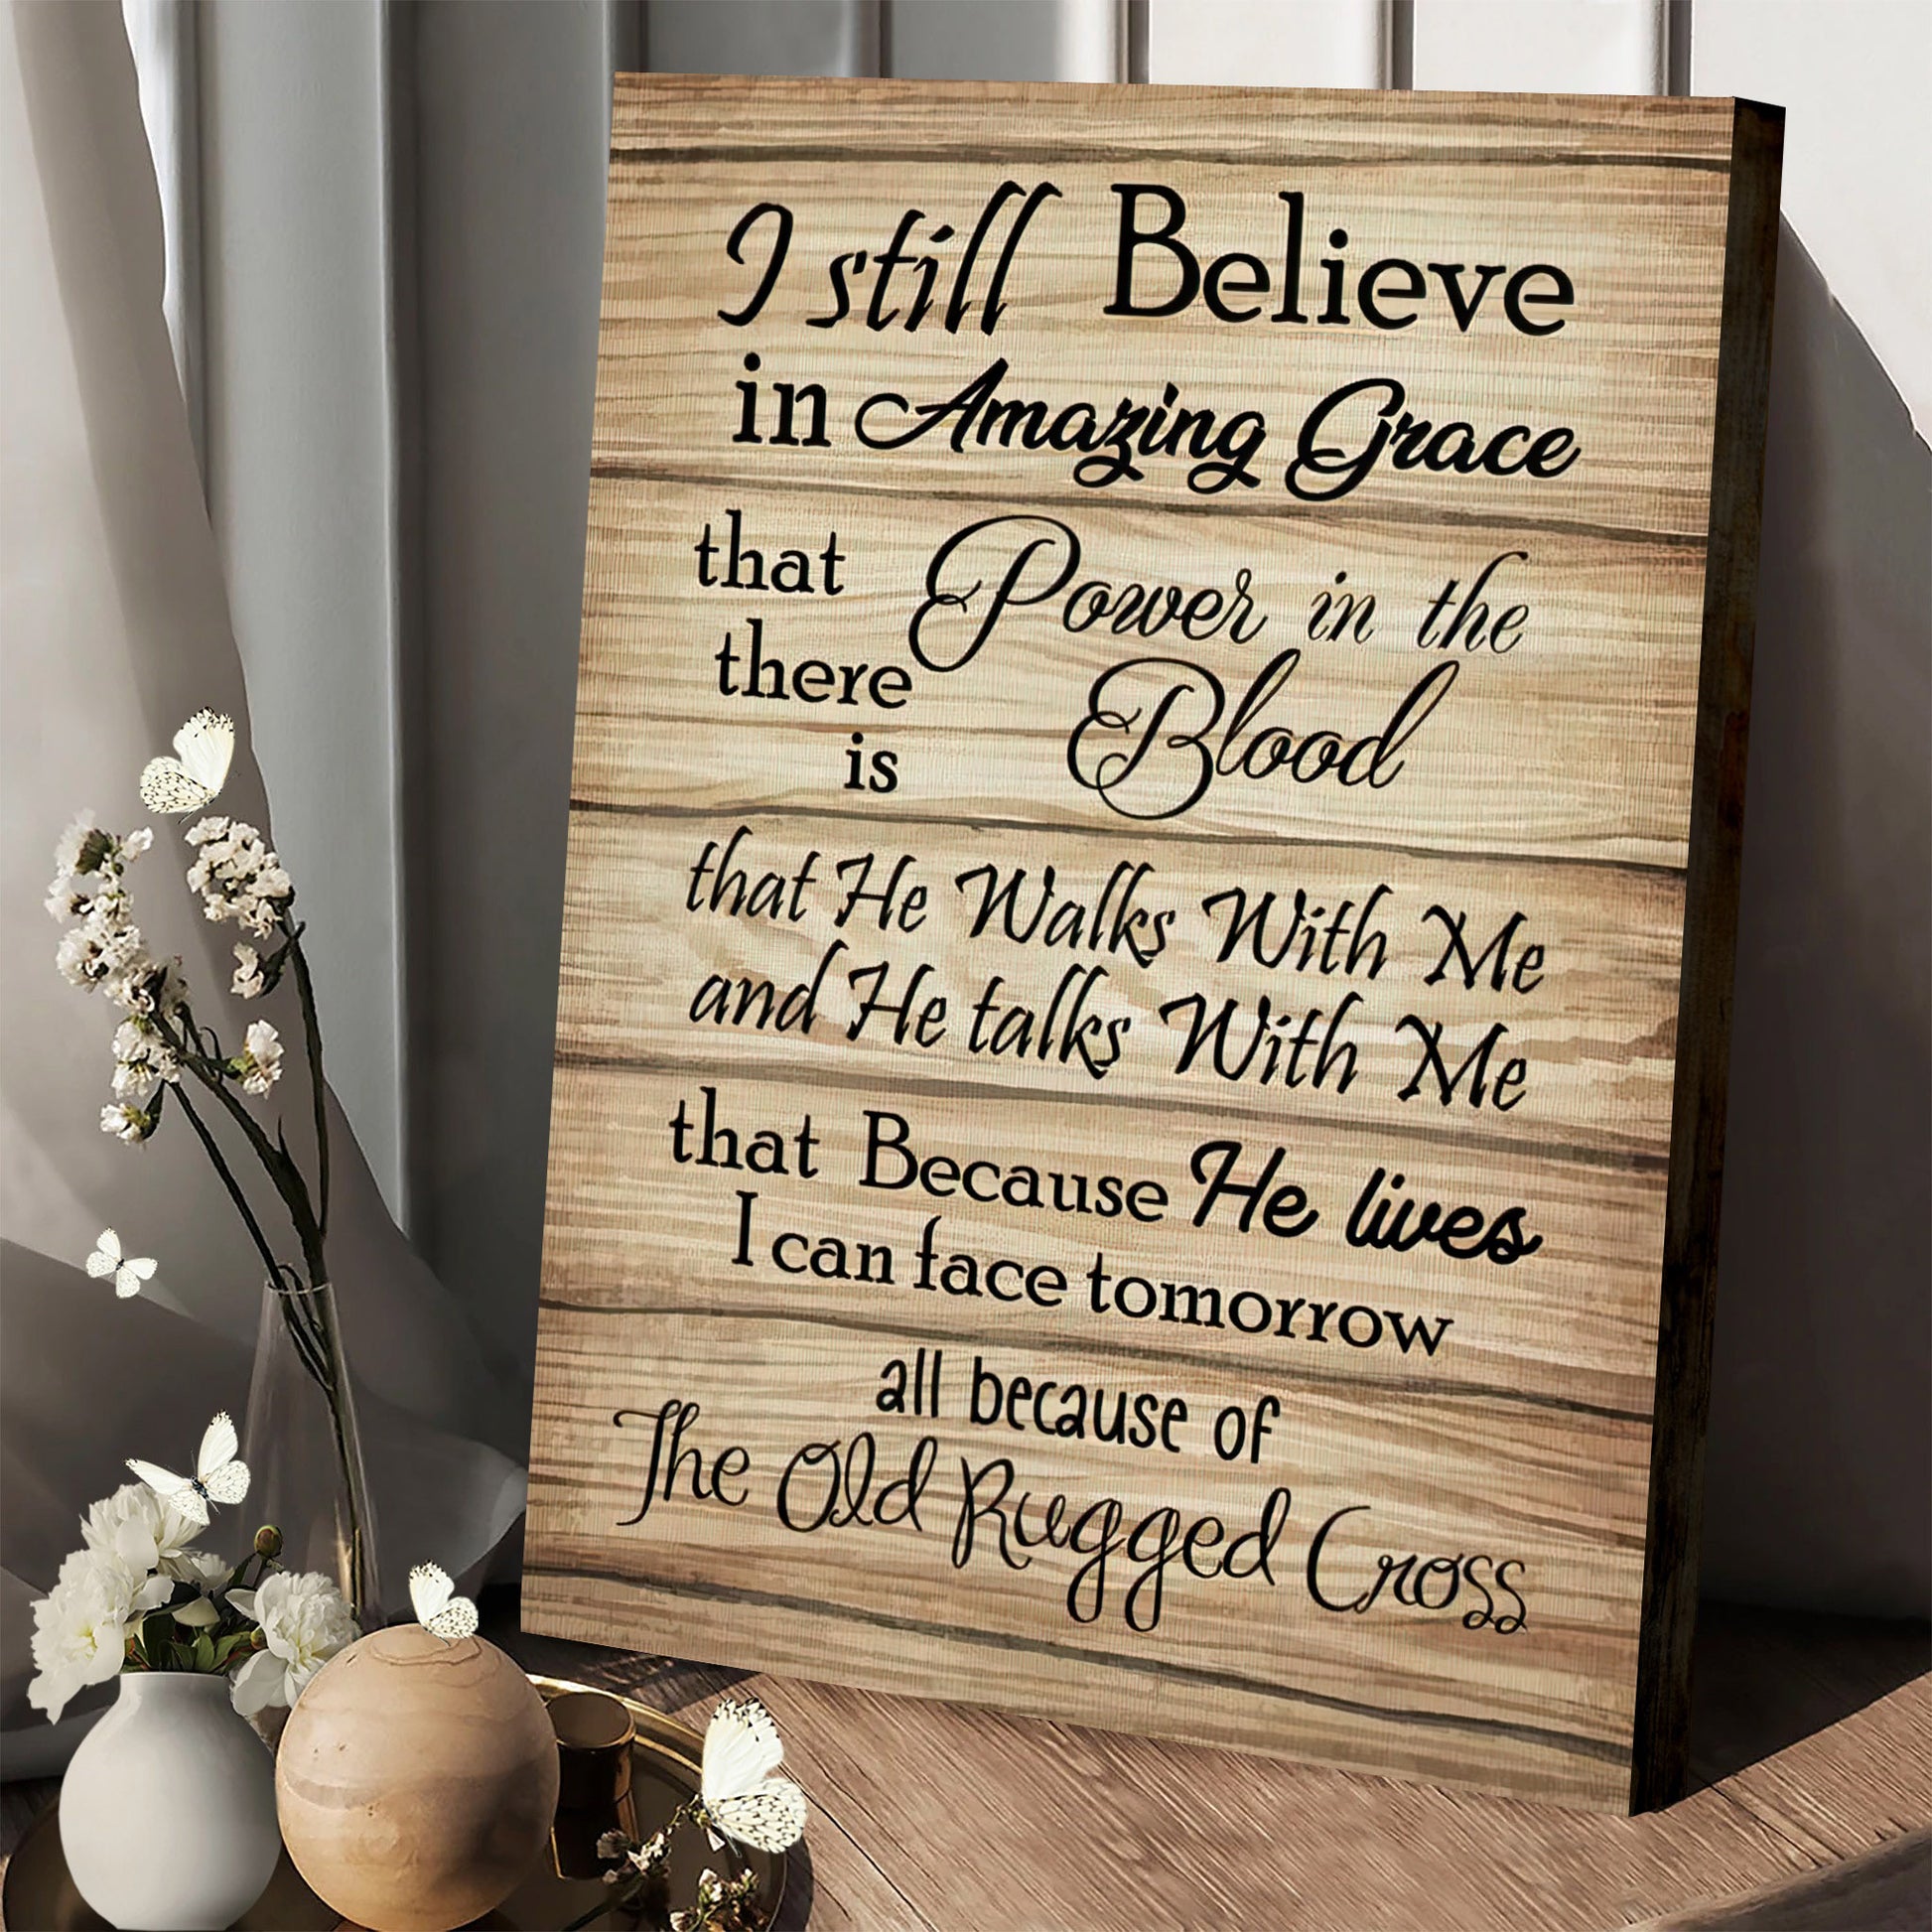 I Still Believe In Amazing Grace Art On Wall - Hanging On Canvas